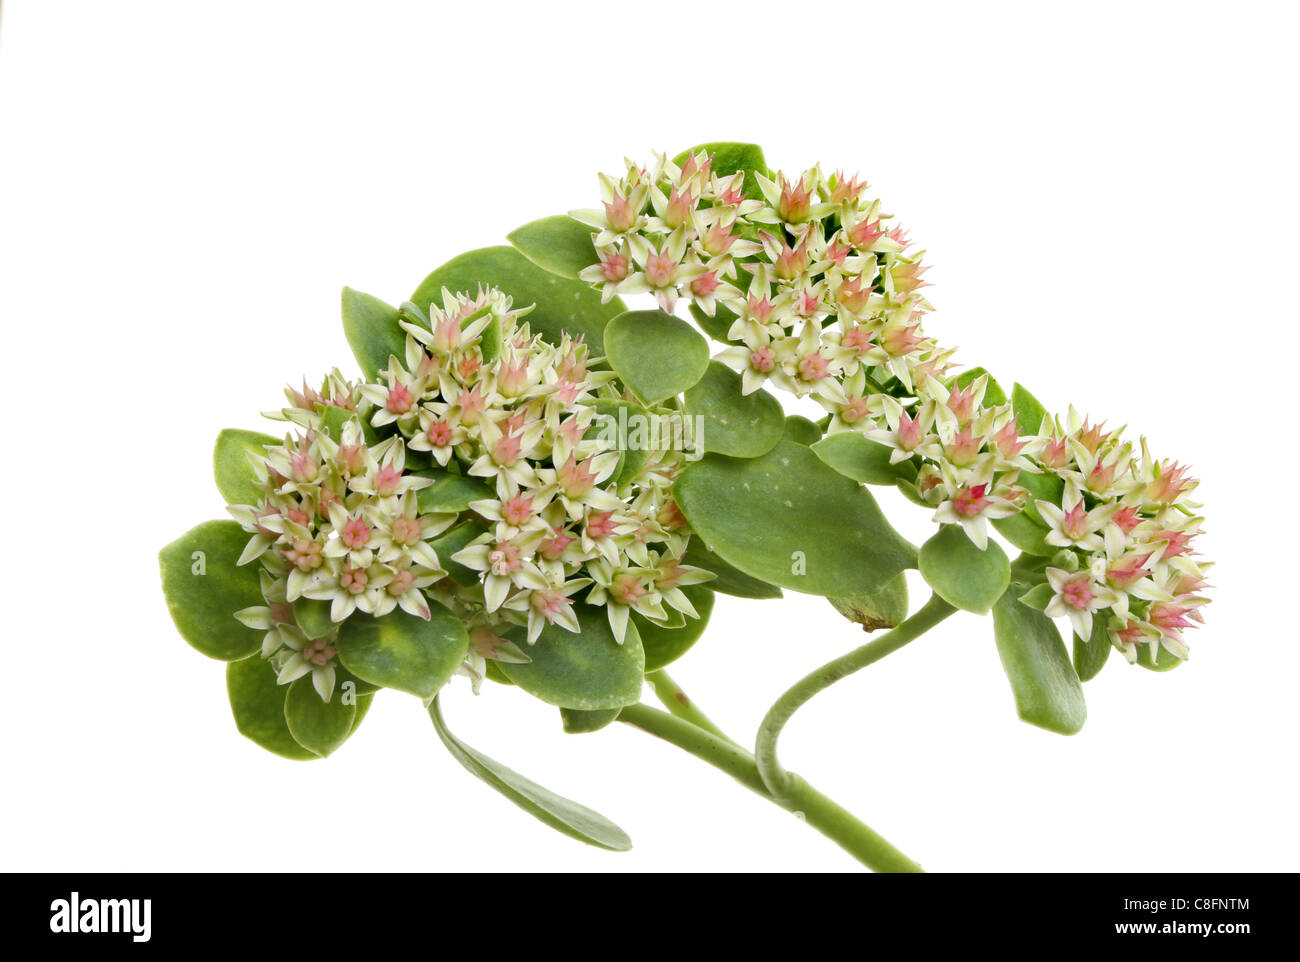 Sedum flowers and leaves isolated against white Stock Photo